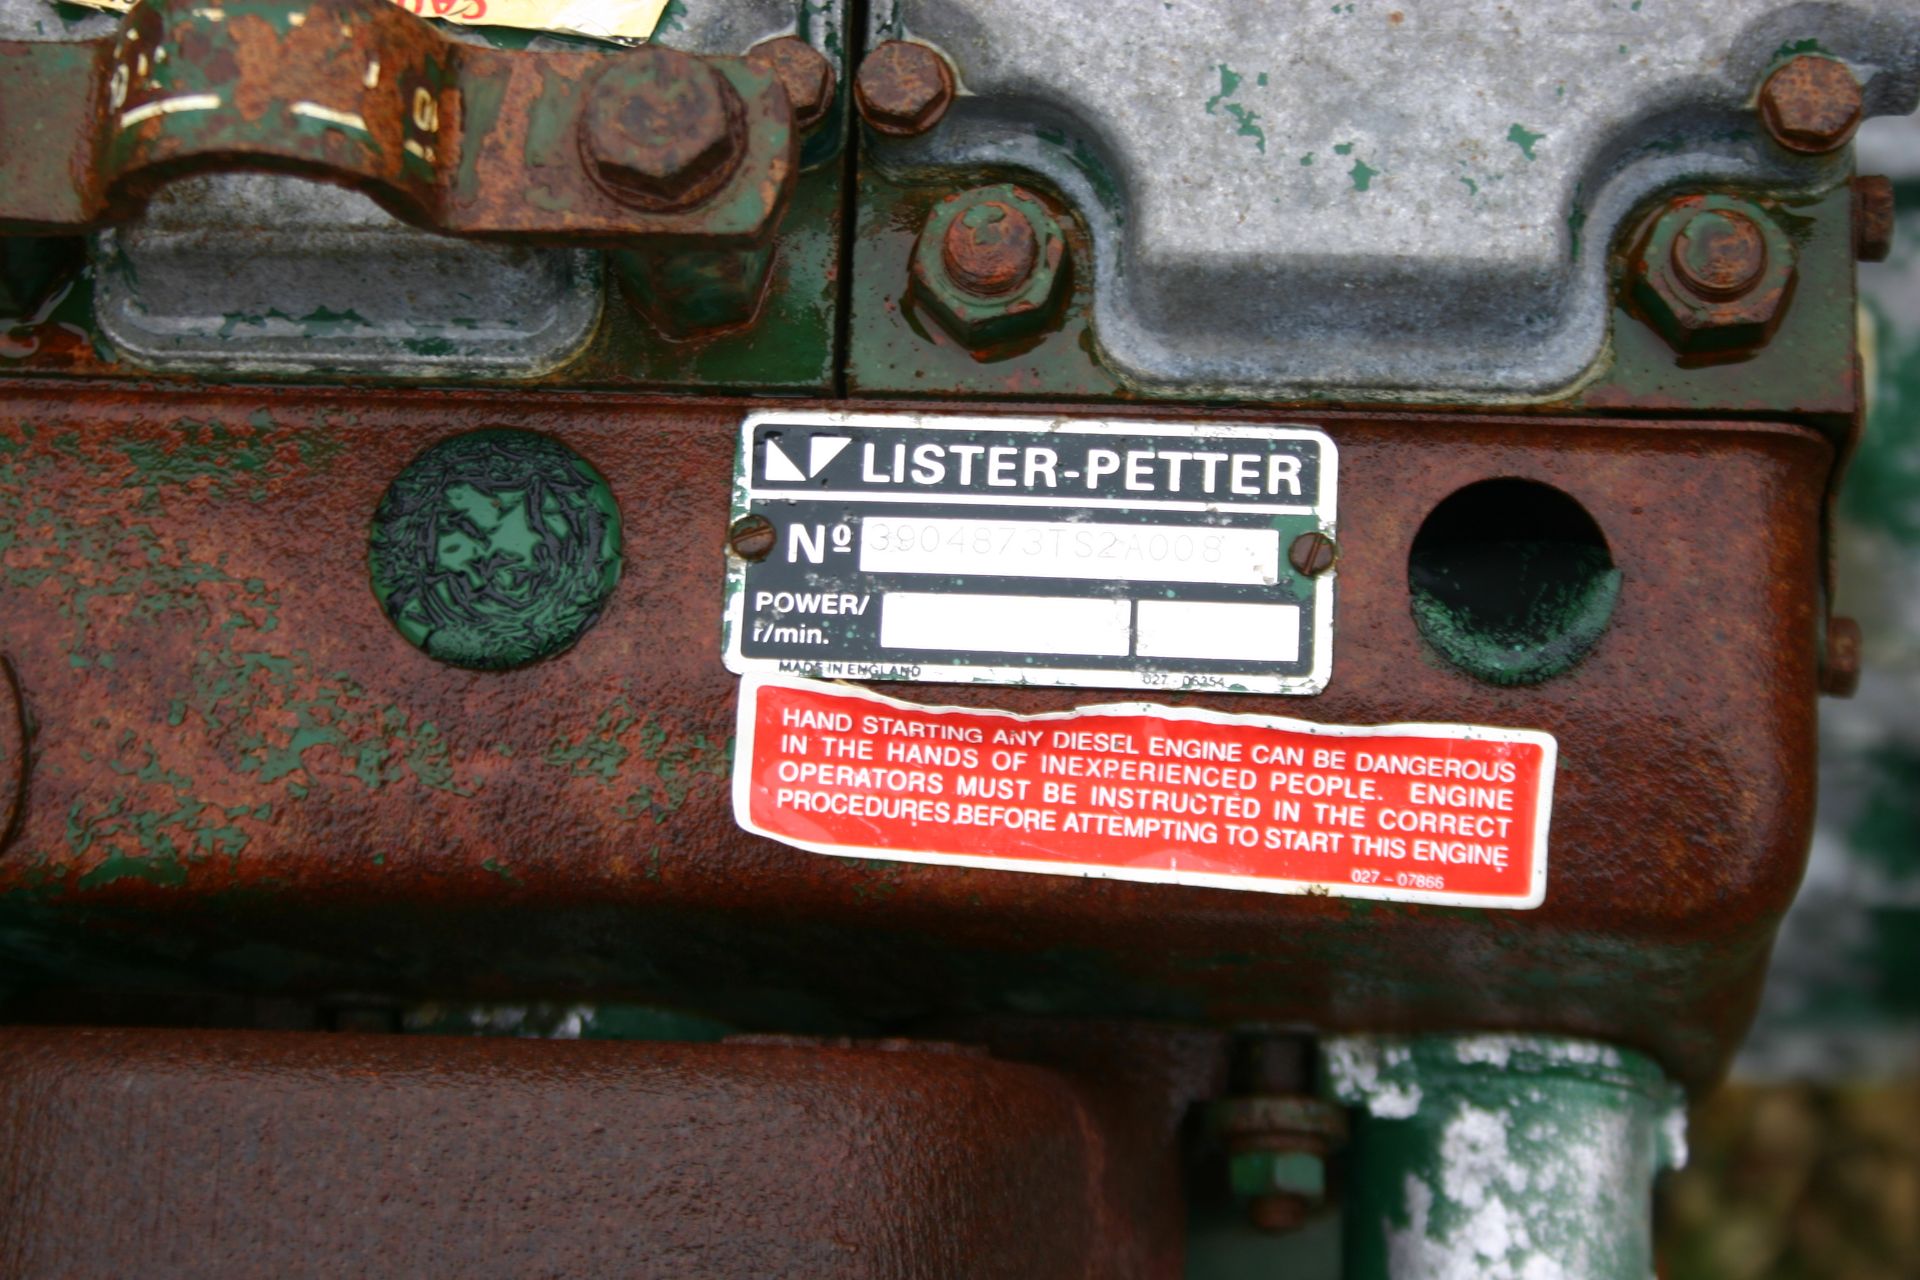 LEROY SOMER LISTER GENERATOR, 9.2 KVA 240 VOLT, FITTED WITH LISTER 2 CYLINDER ENGINE, ELECTRIC START - Image 3 of 6